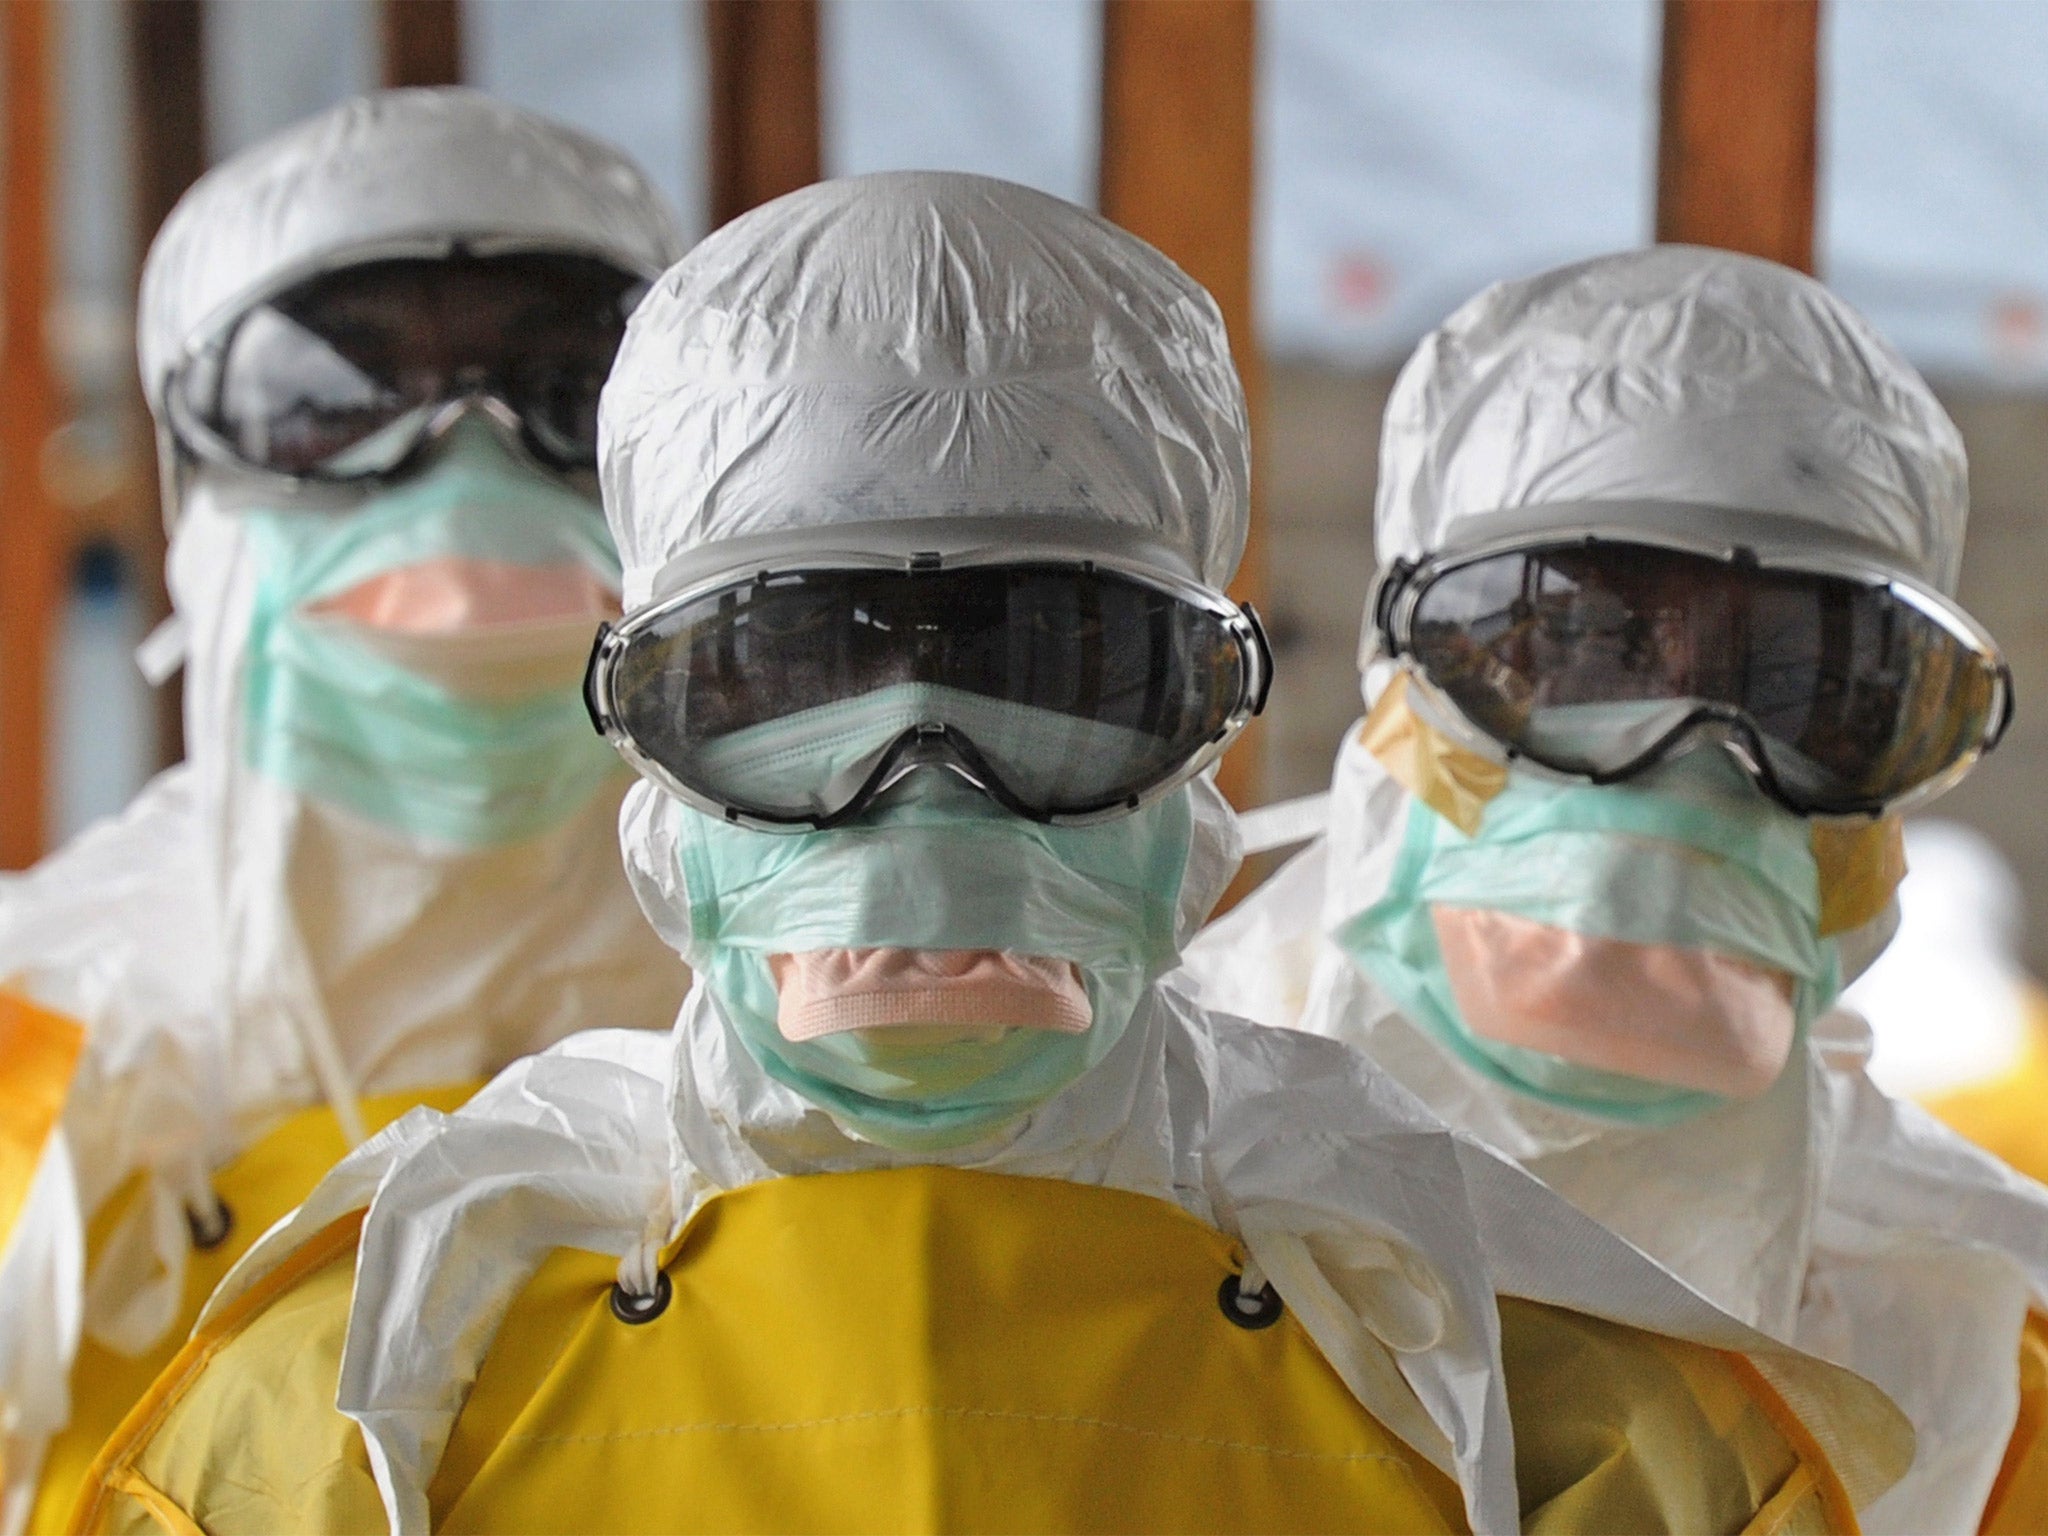 Healthcare workers in Liberia, where the disease has spread, dressed in protective clothing.